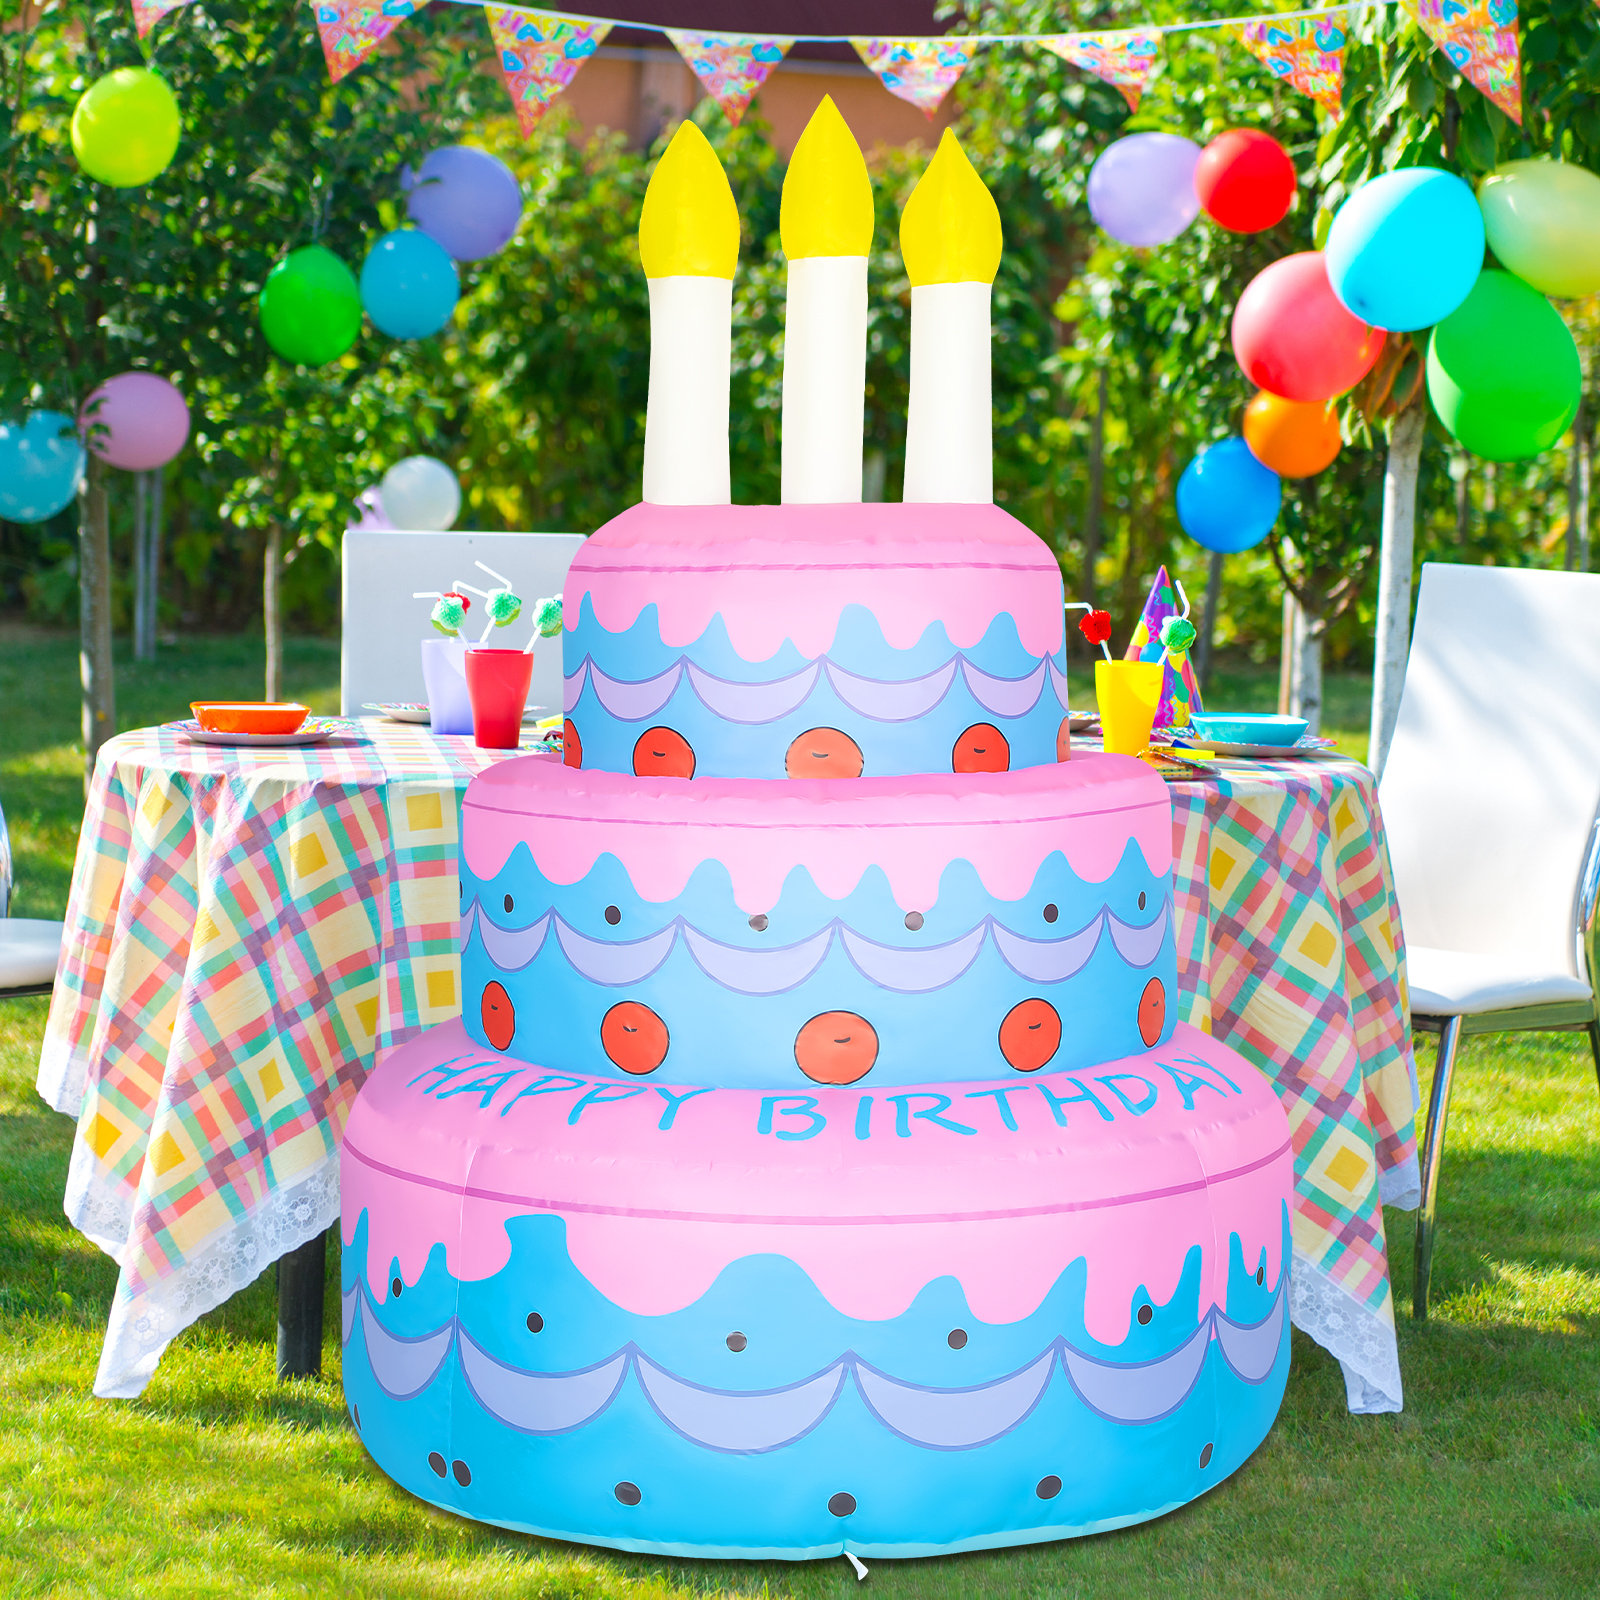 Pool Party | Pool party cakes, Pool birthday party, Pool cake